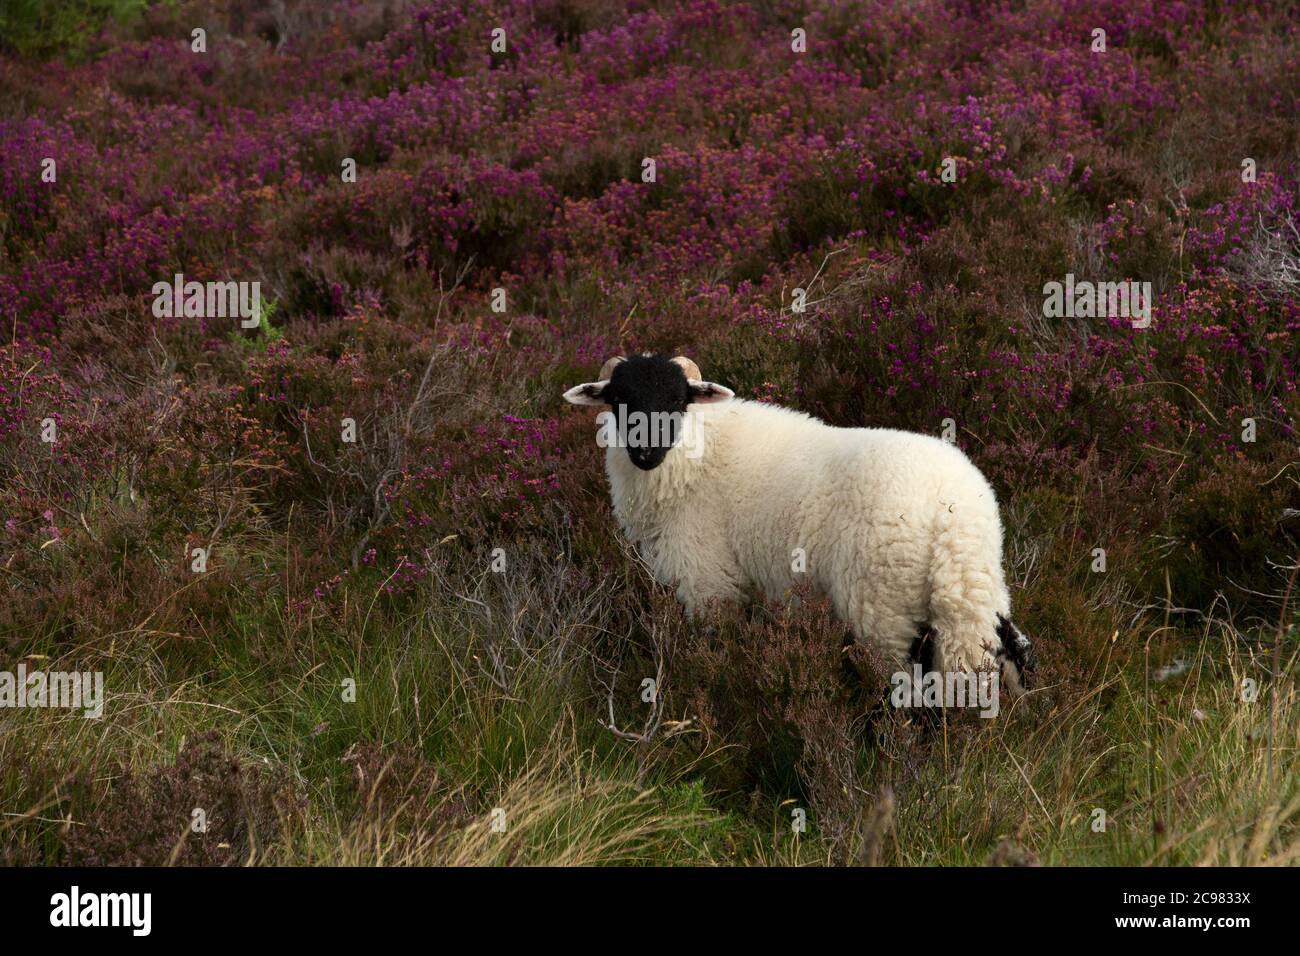 During summer the heather blooms and makes the stark landscape of the North Yorkshire Moors come to life. The Swaledale breed of sheep are hardy Stock Photo